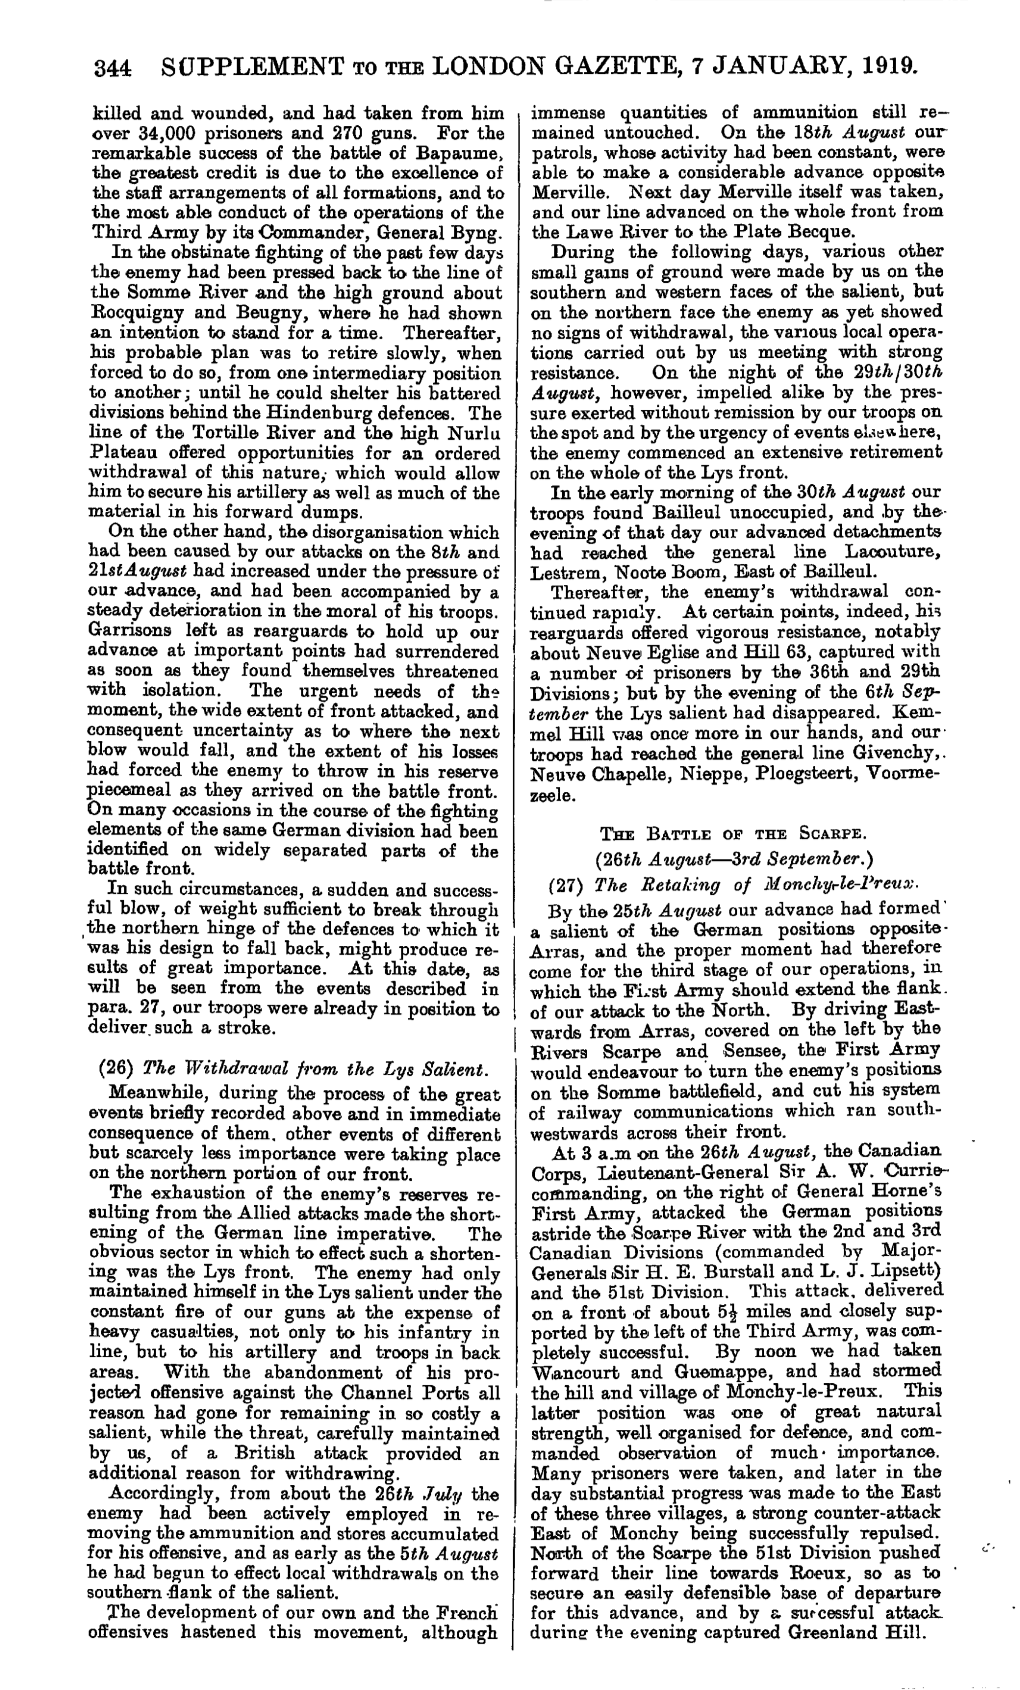 344 Supplement to the London Gazette, 7 January, 1919